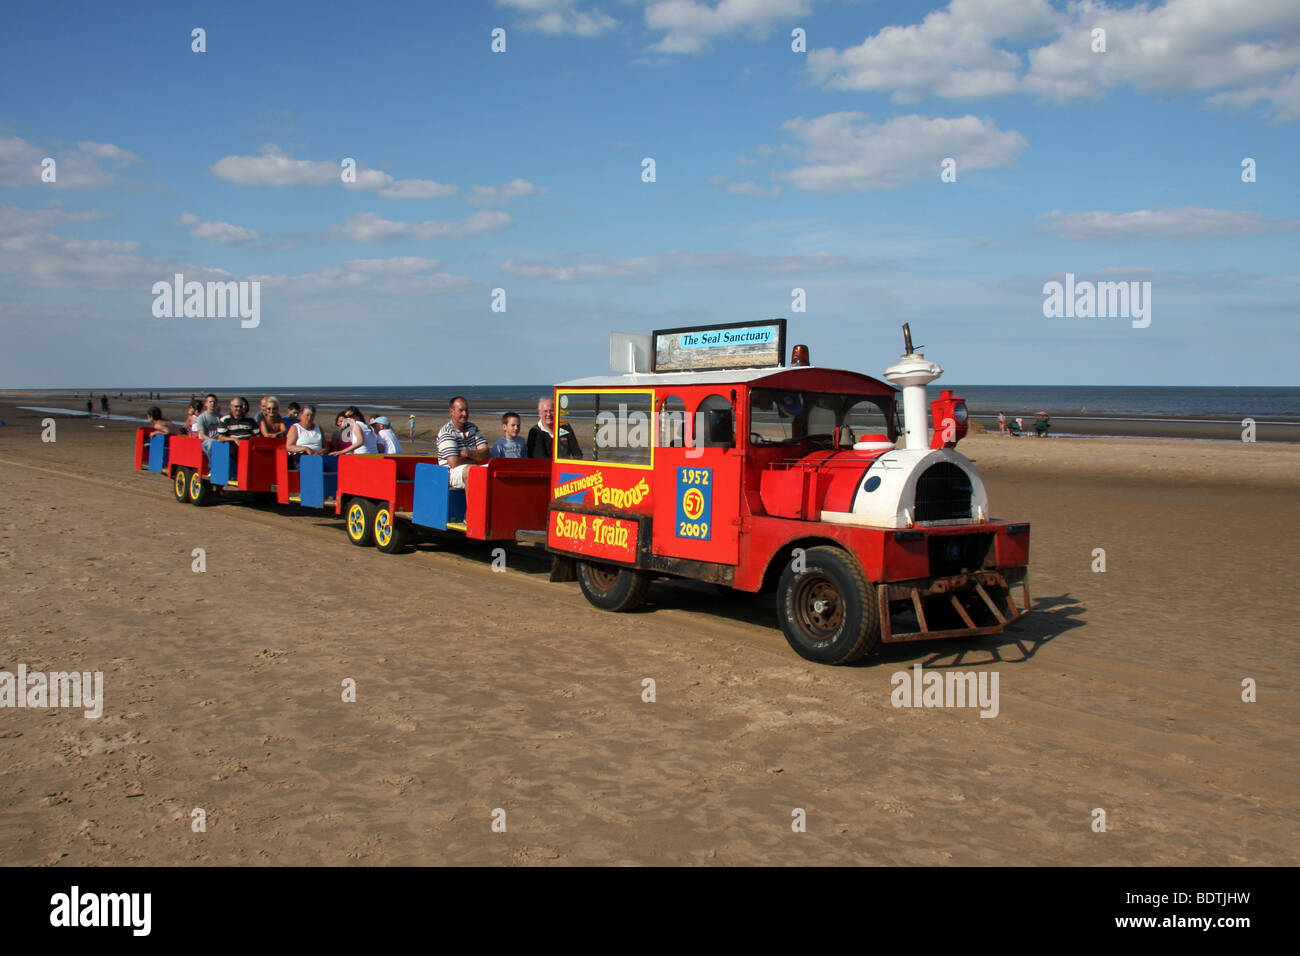 Famous Sand Train on beach at Mablethorpe, Lincolnshire Stock Photo